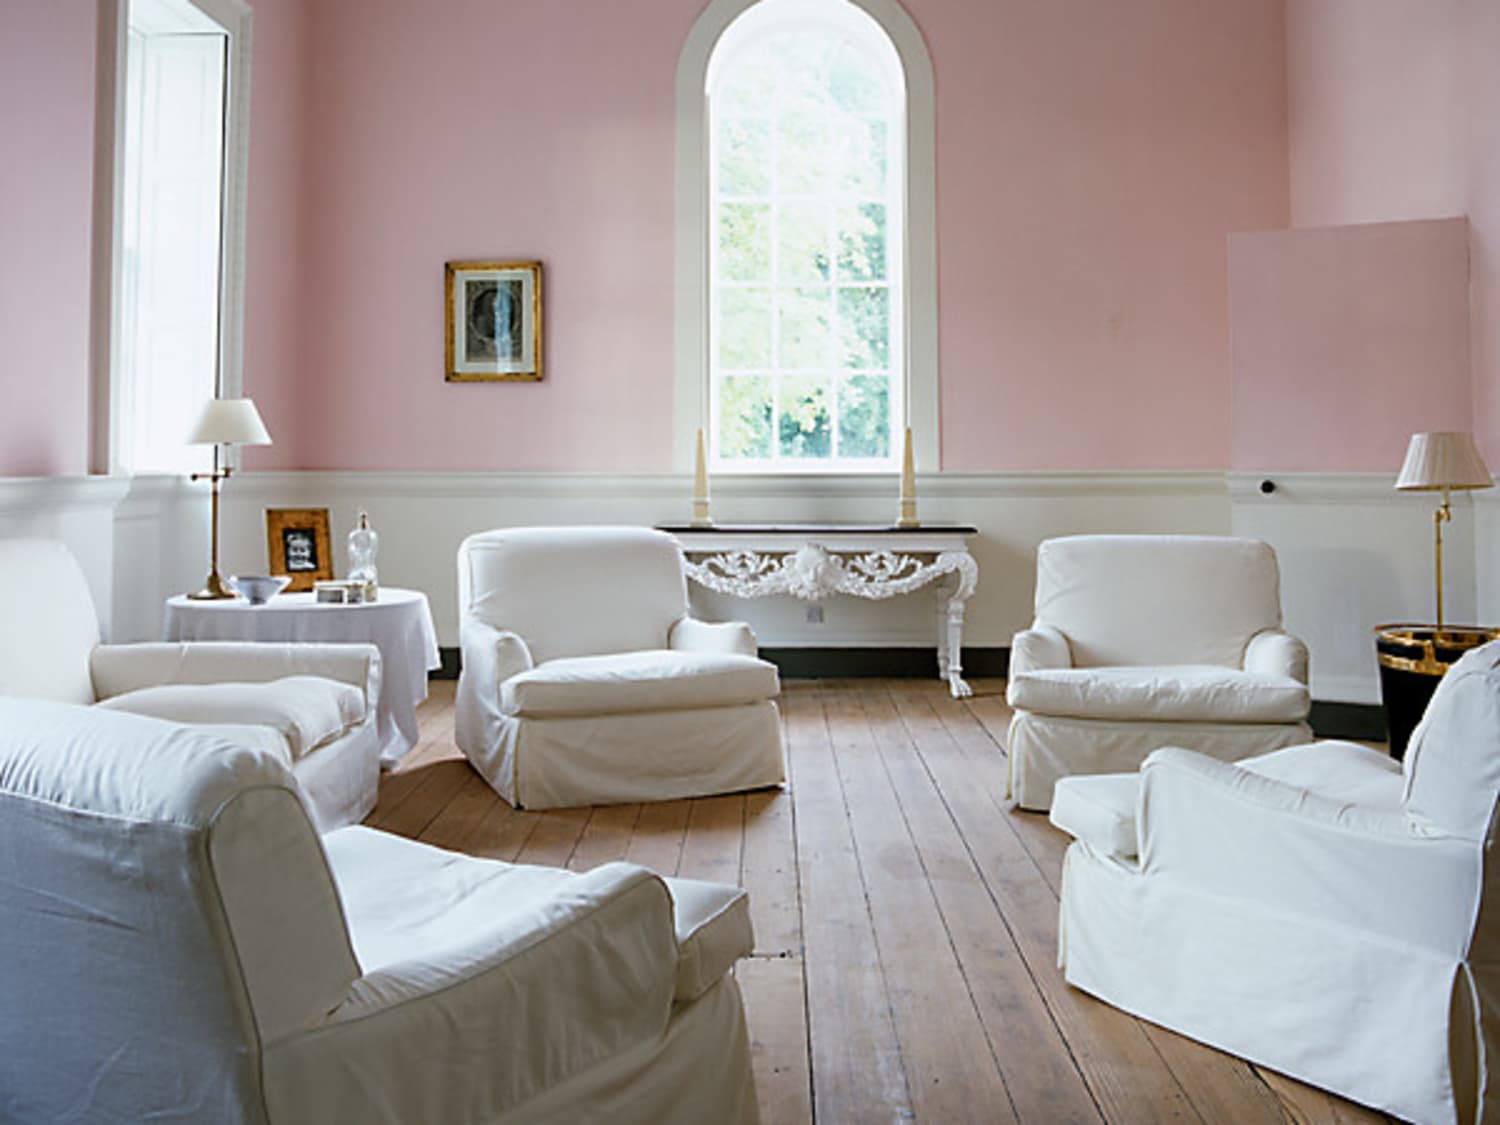 House & Home - Painting Walls Pink? Make Sure You Do This One Thing!